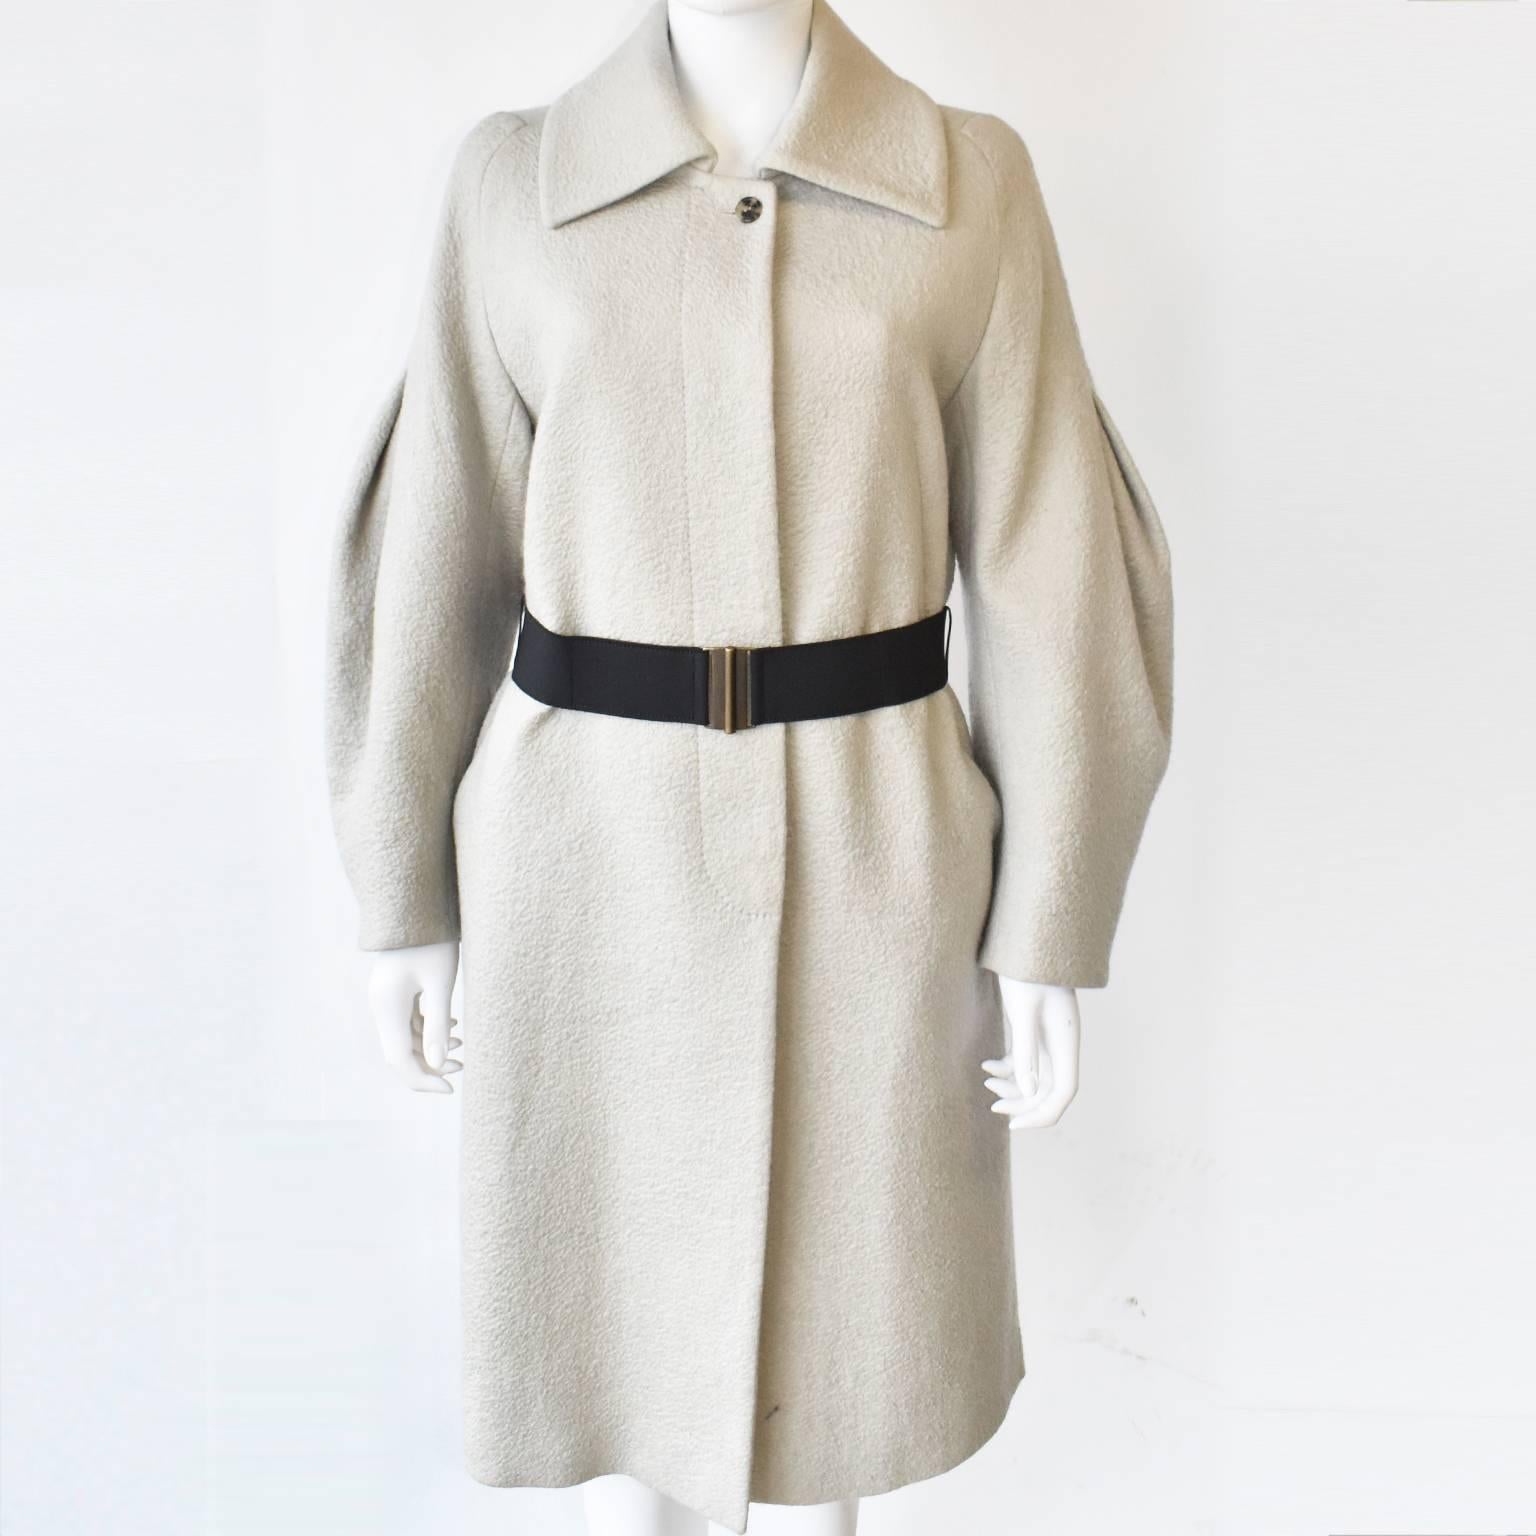 A light sand coloured textured wool blend coat with balloon sleeves by Dries Van Noten. It features a large collar,  button fastening, and a black elasticated belt but can be worn without. It is in excellent condition. 